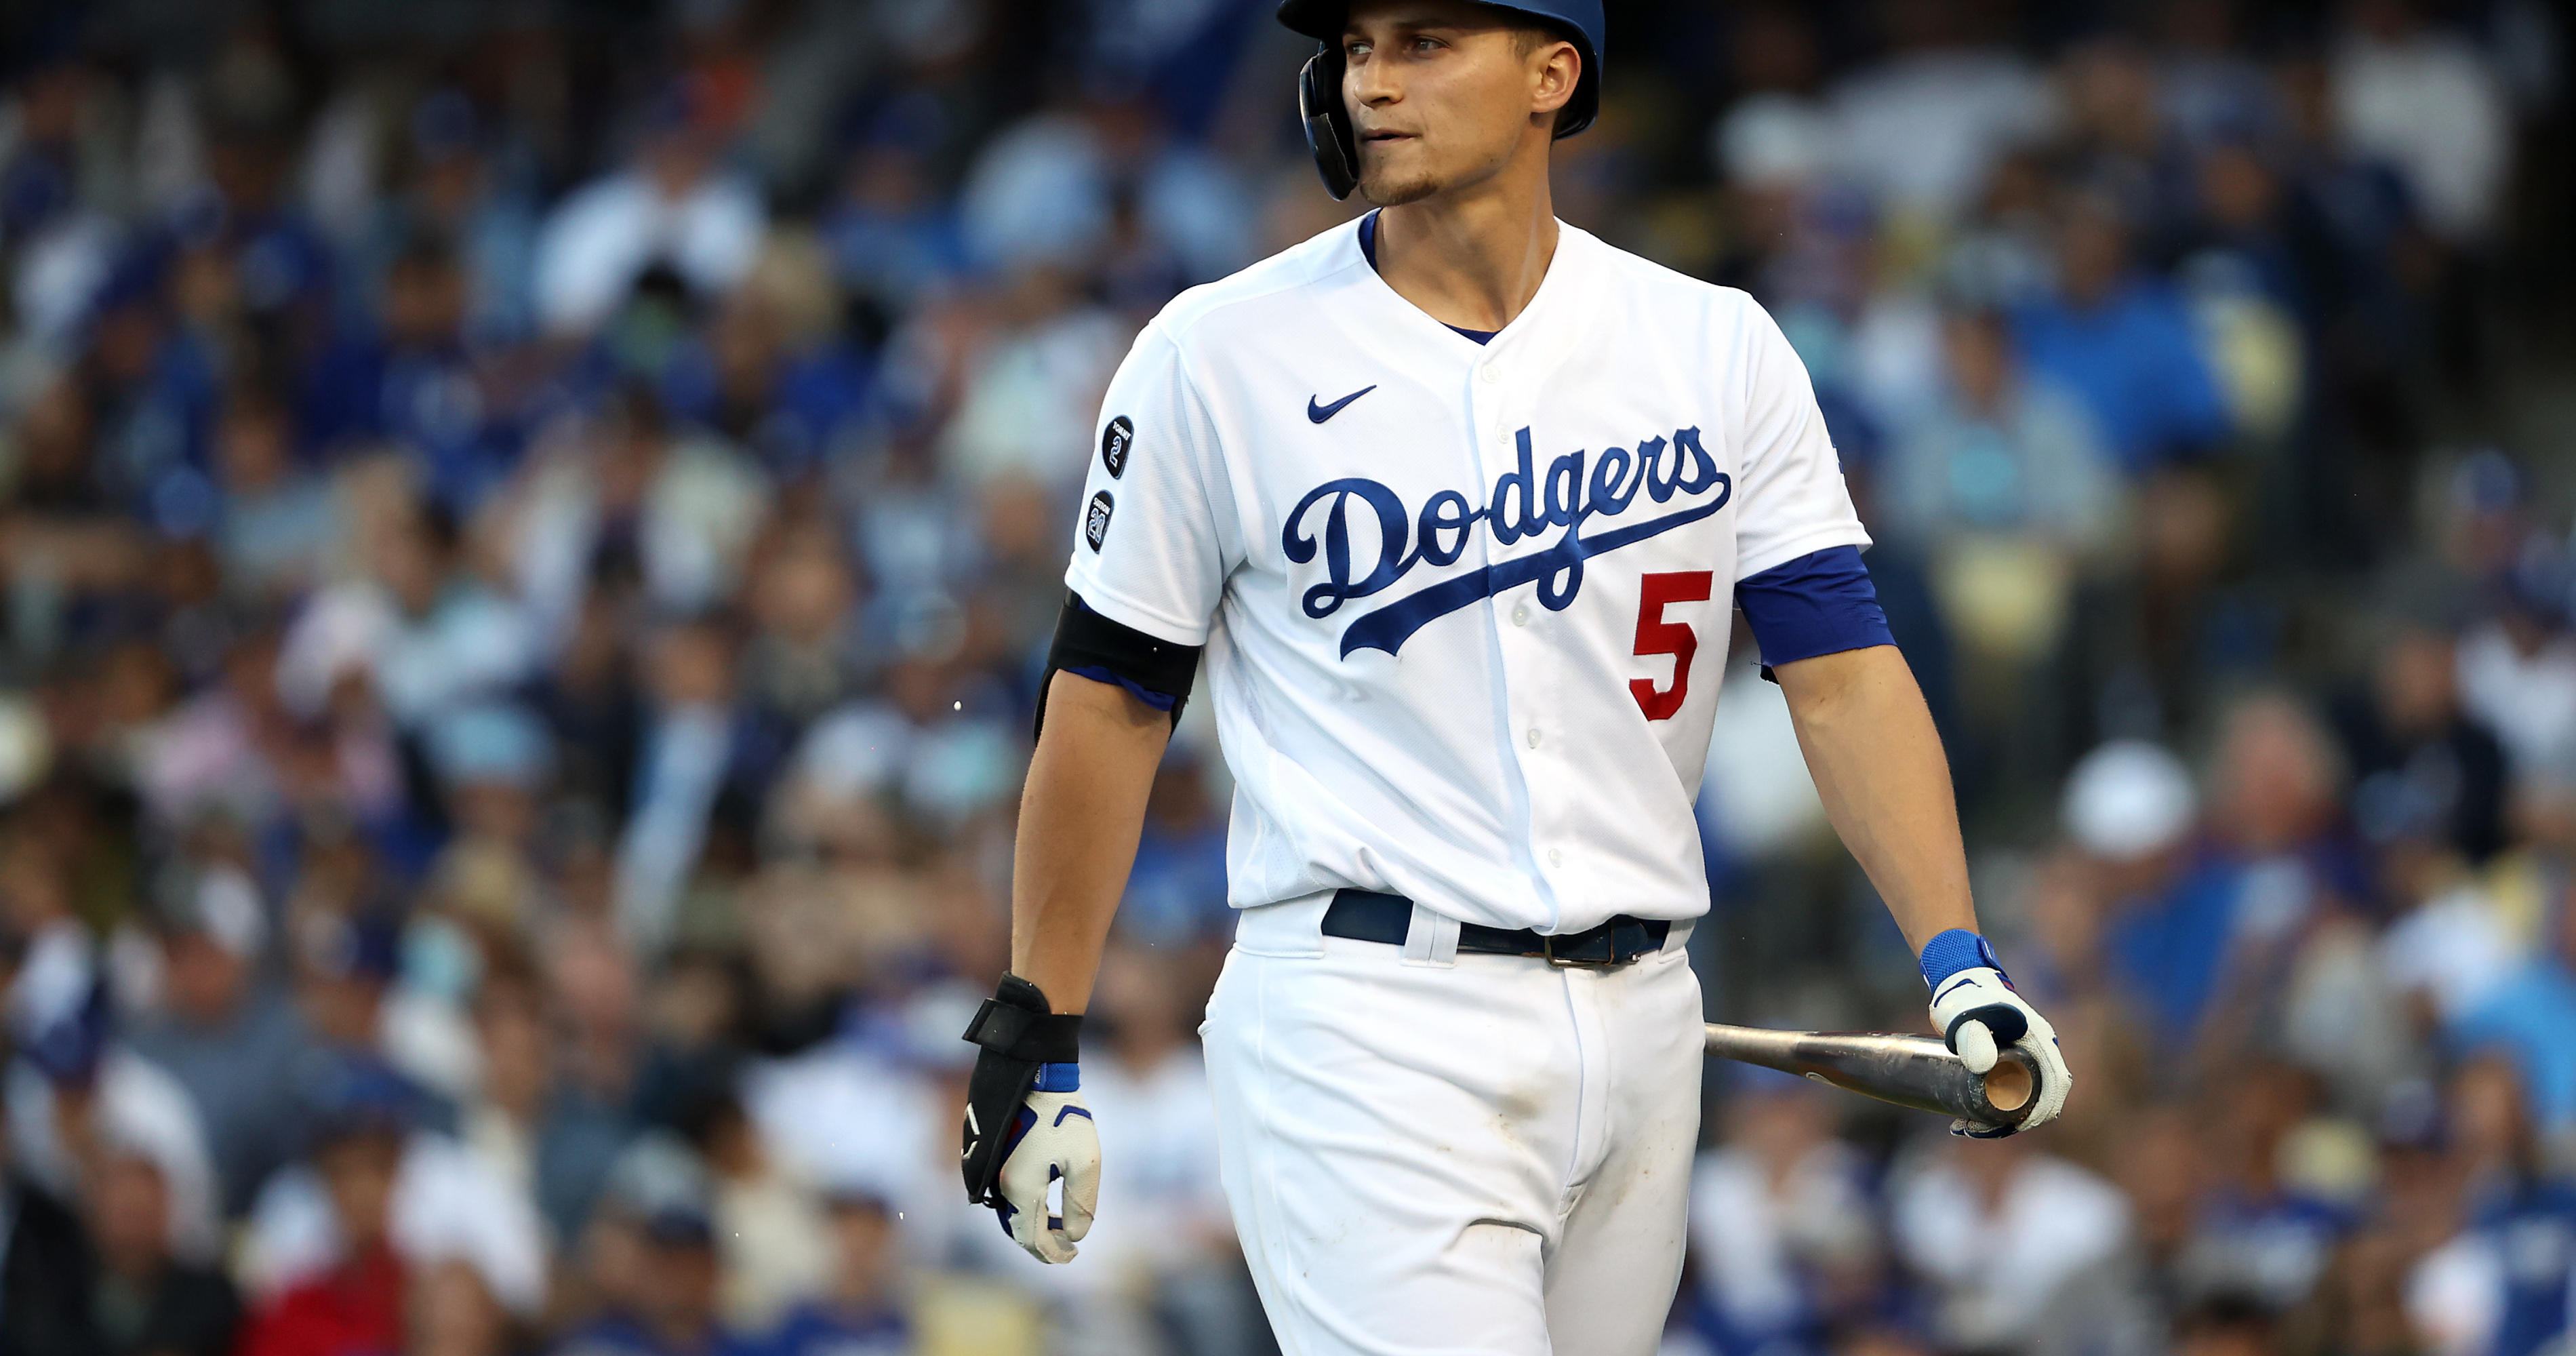 Corey Seager arbitration: Previewing the Dodgers shortstop's '21